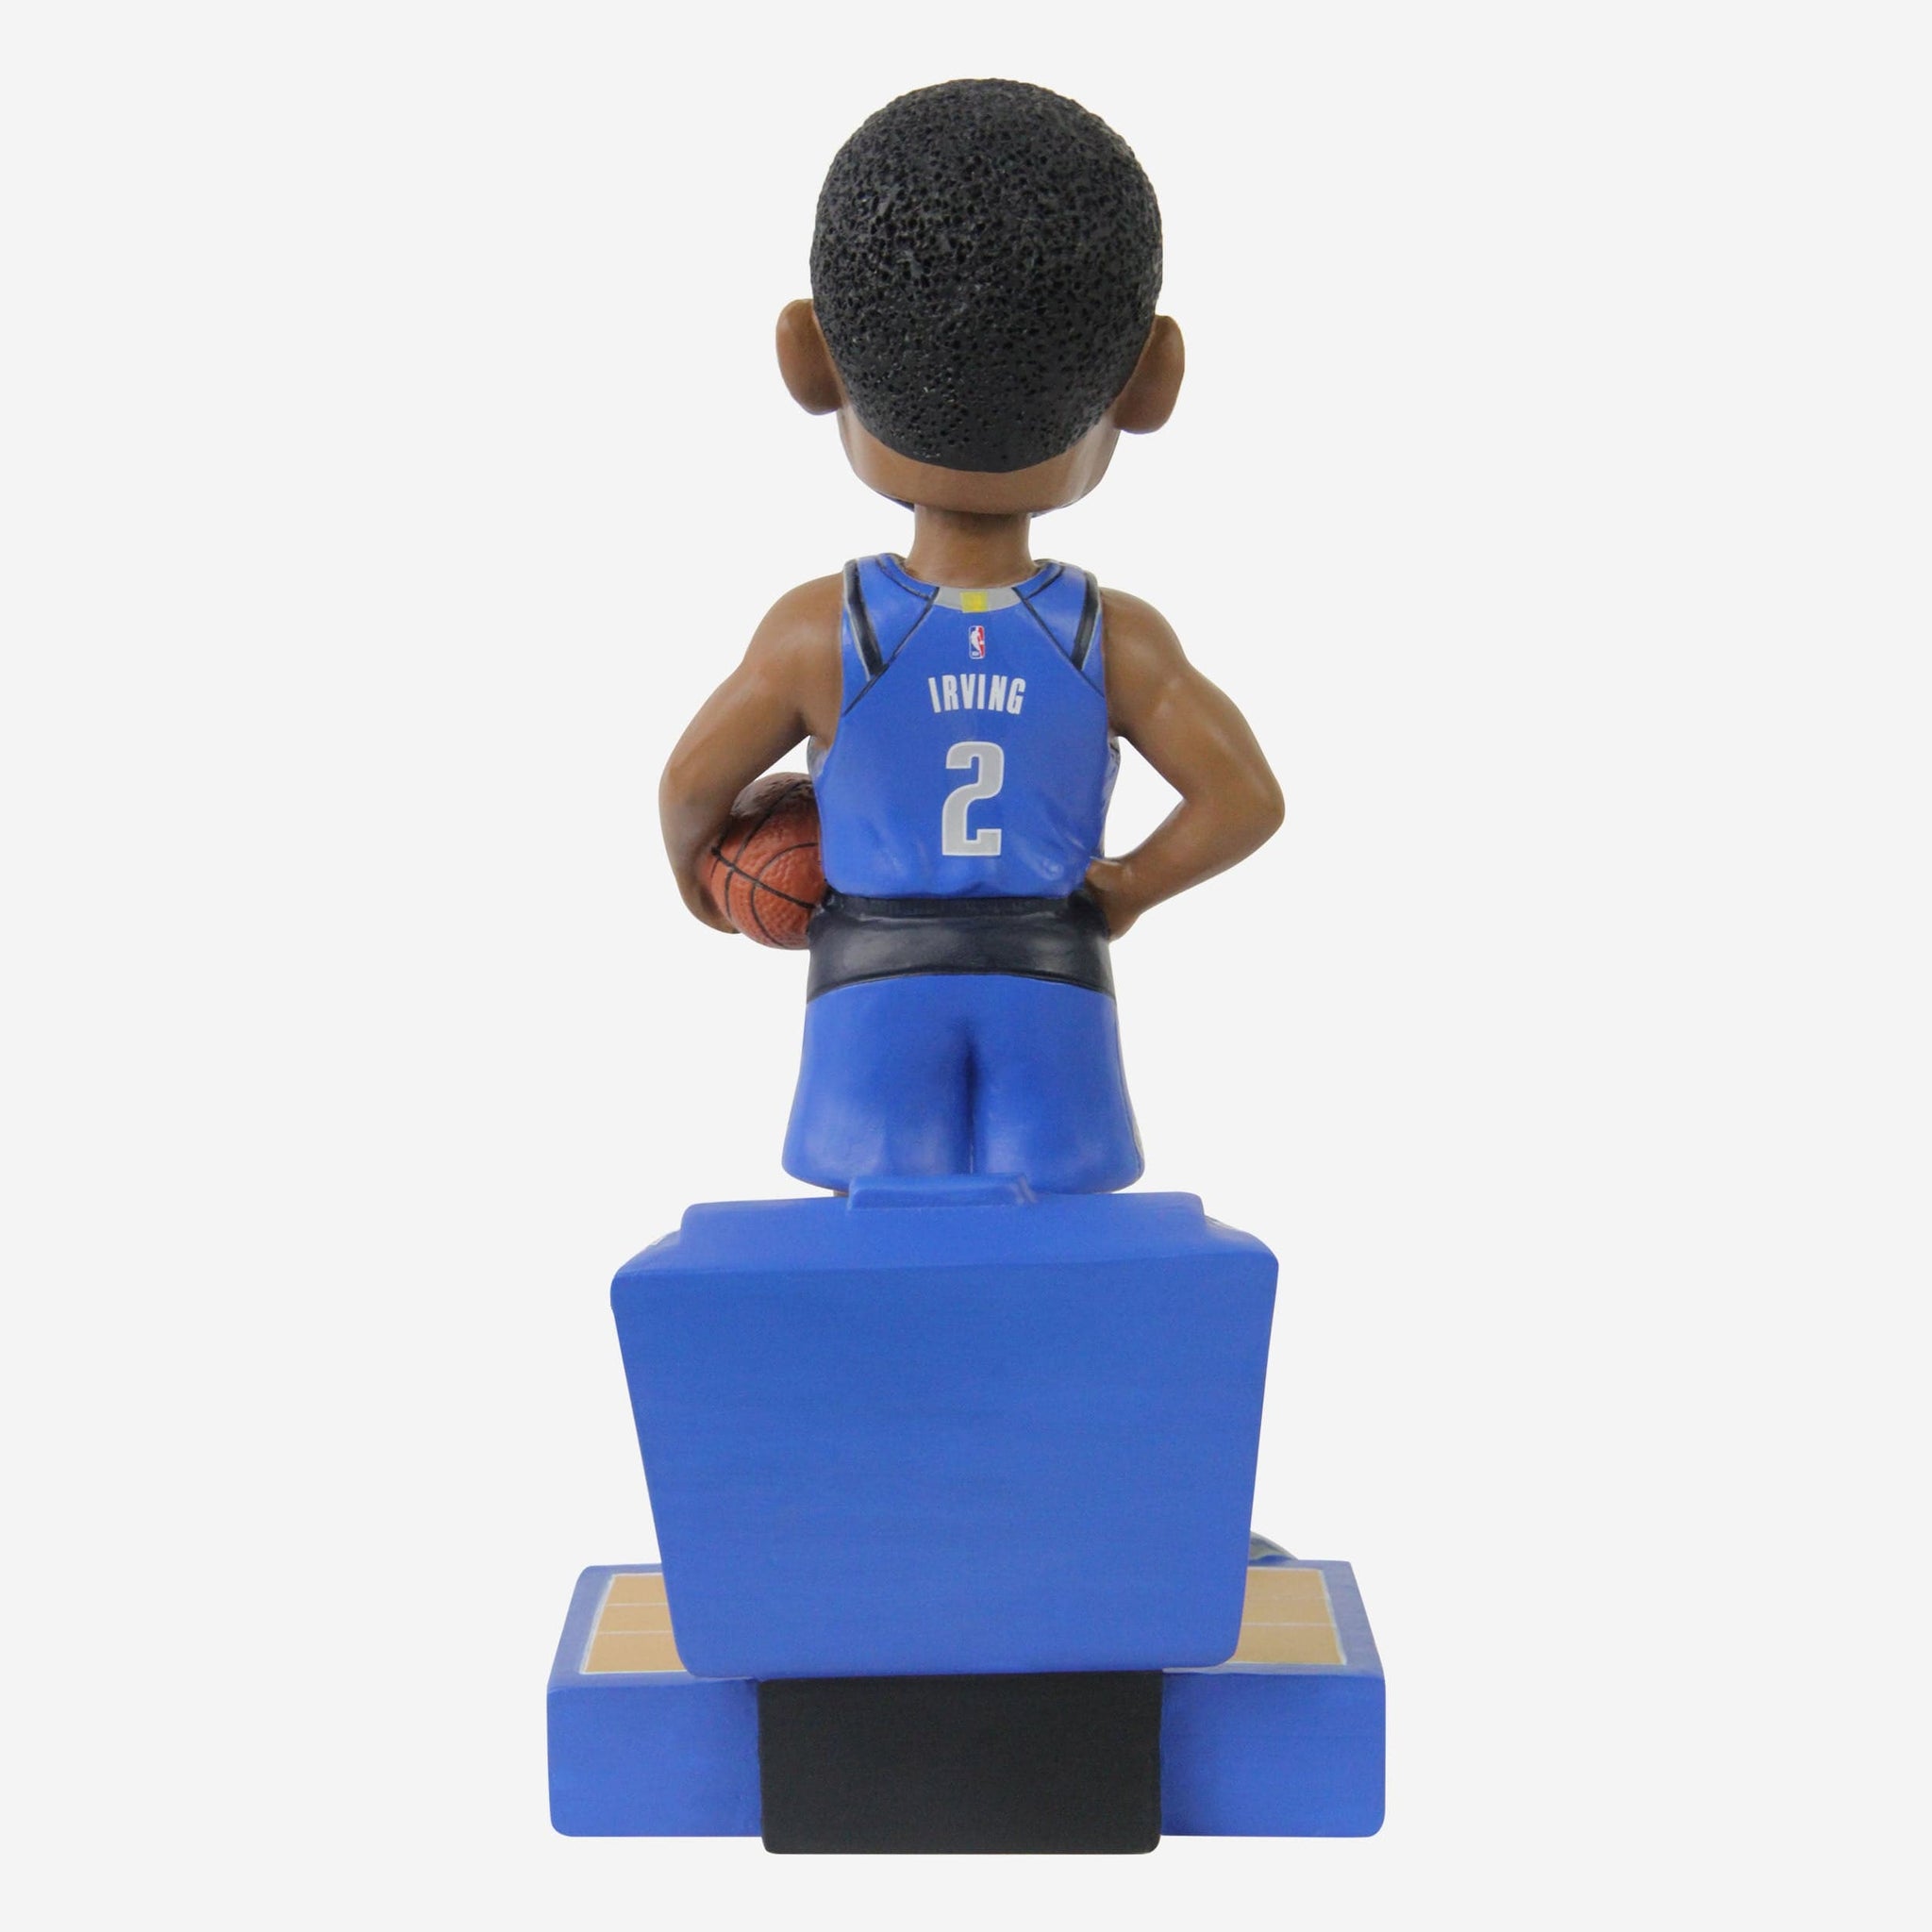 Kyrie Irving Dallas Mavericks Next Stop Bobblehead Officially Licensed by NBA